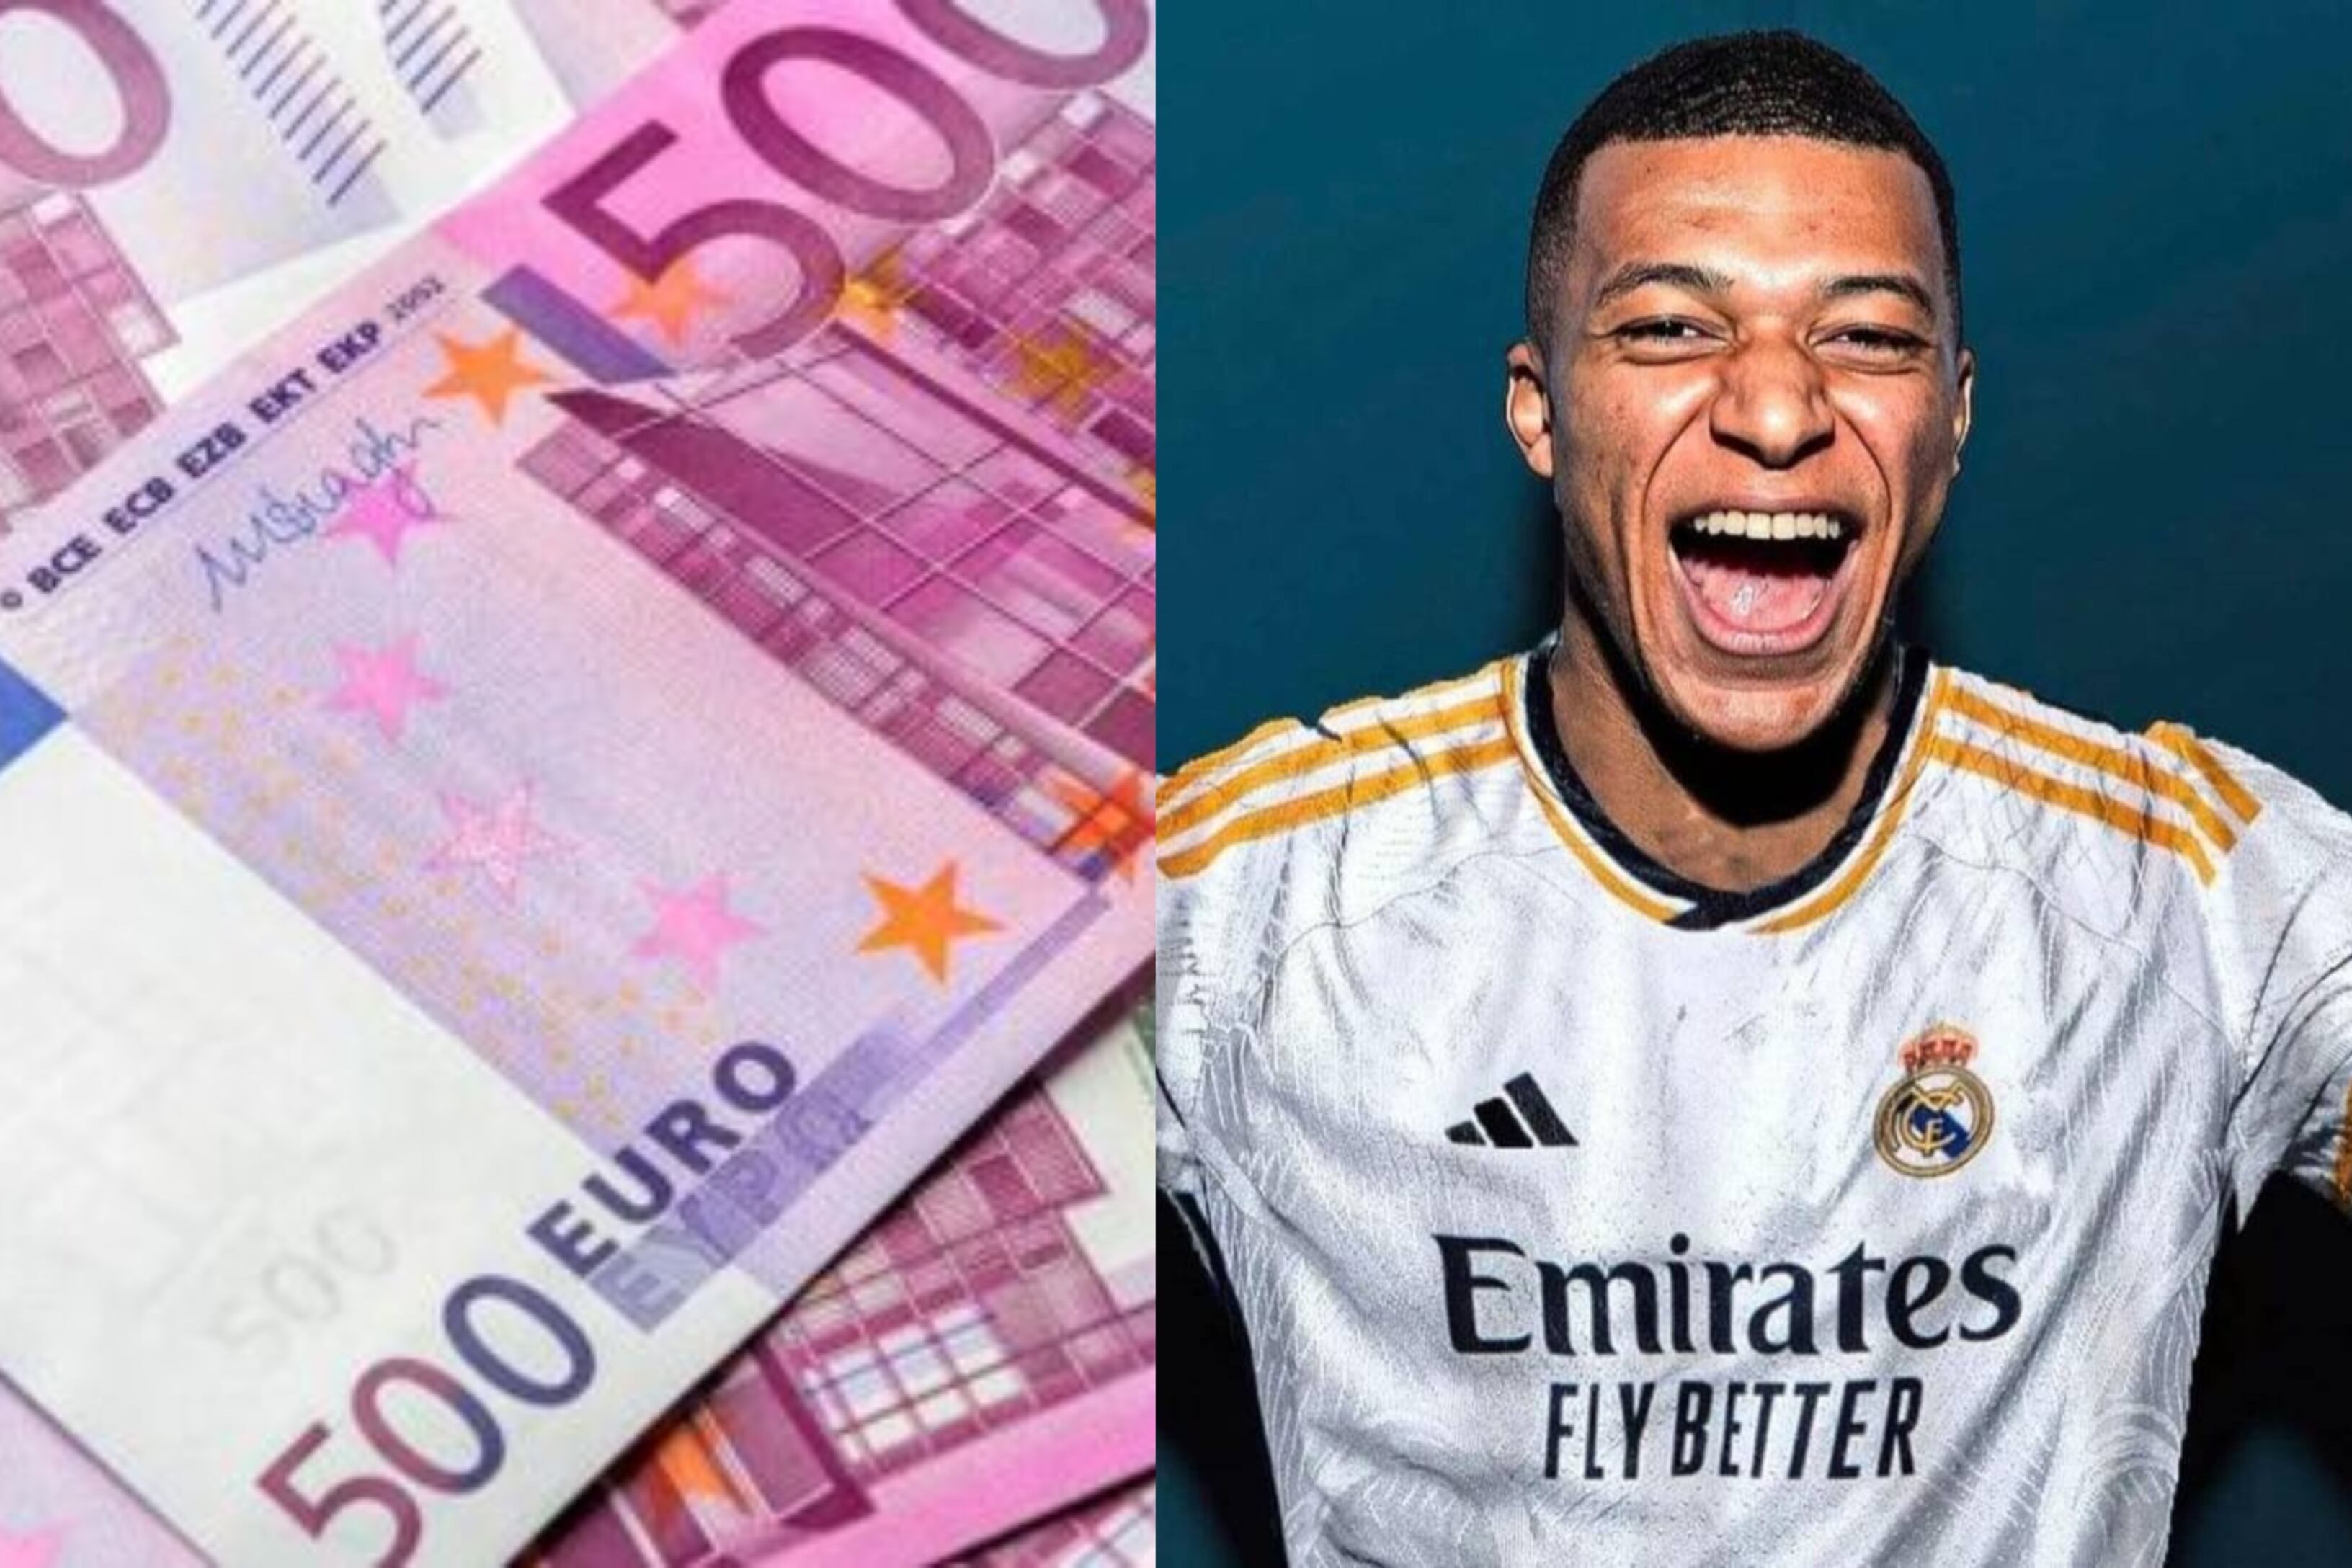 Not only PSG need him, the fortune the French league could lose if Mbappé leaves for Real Madrid